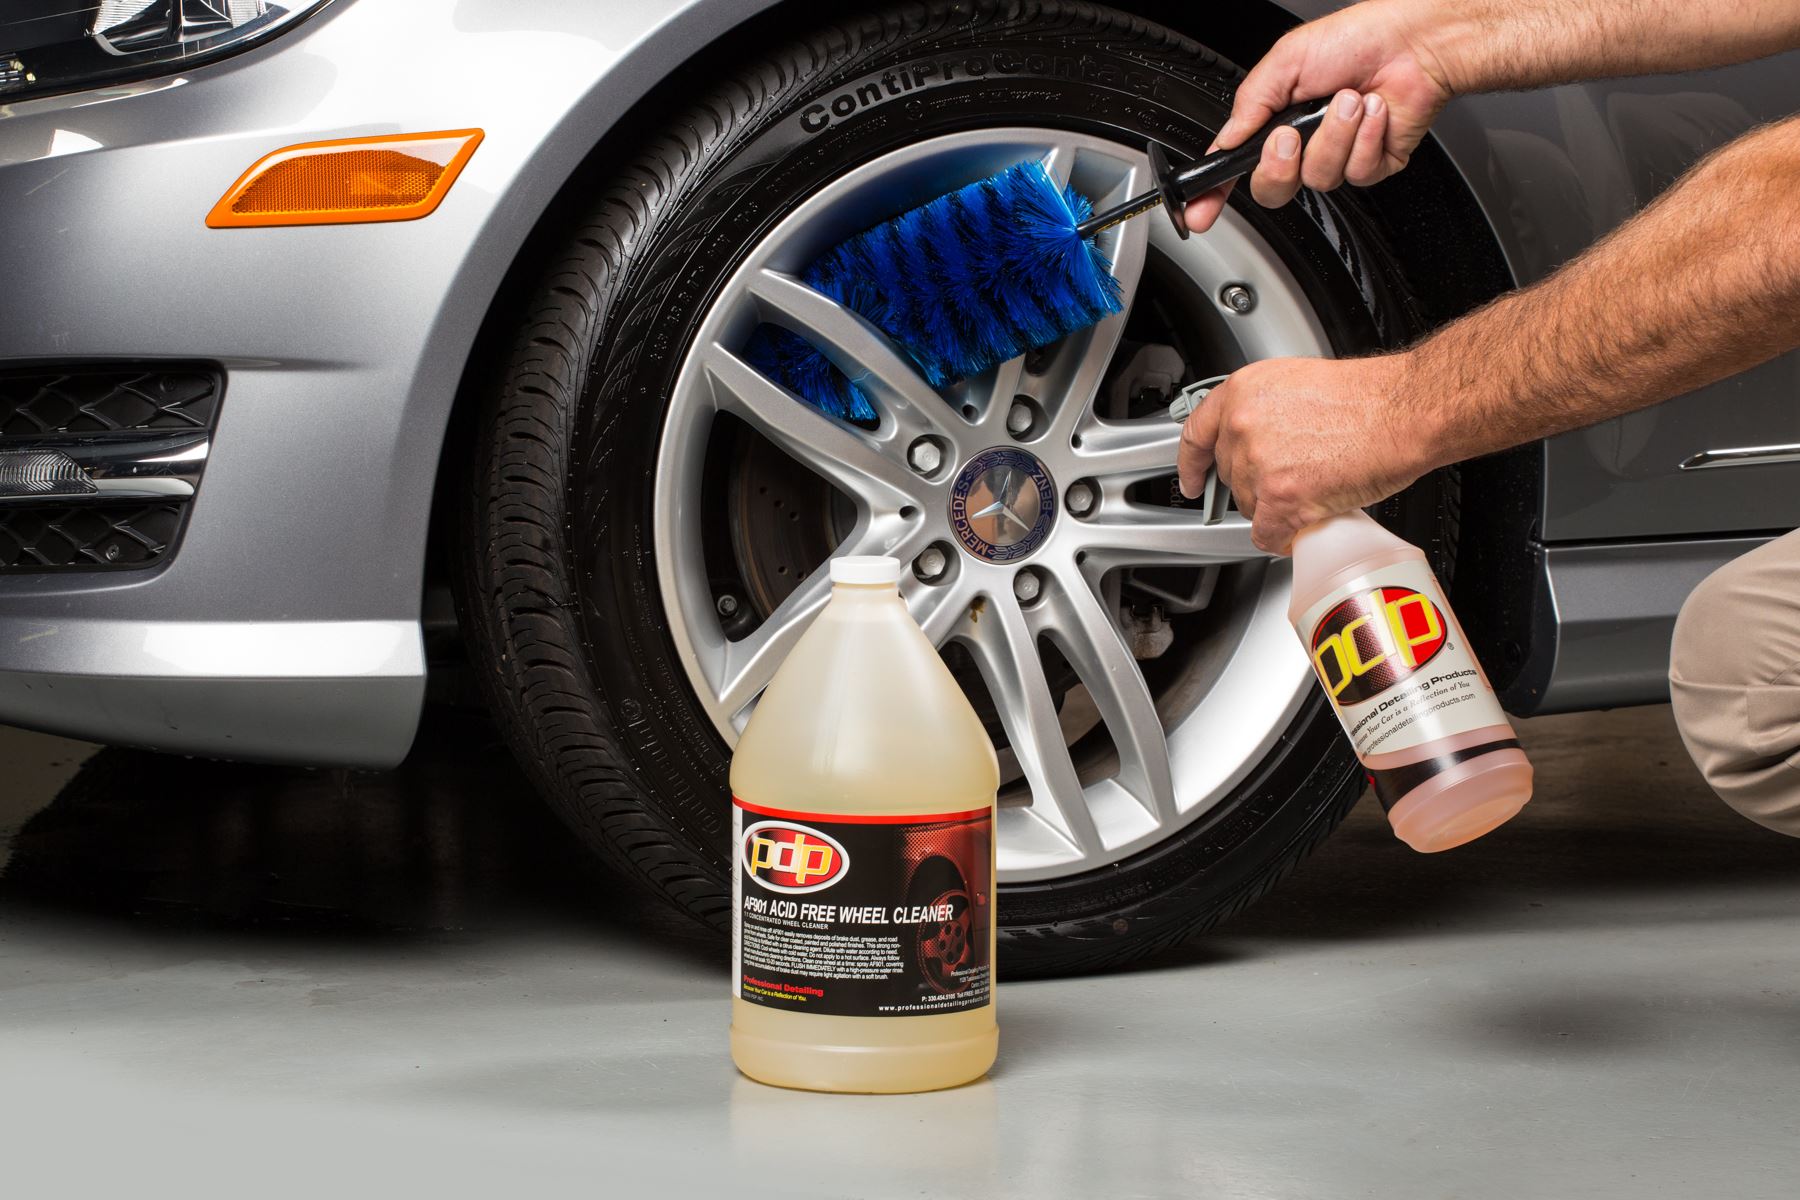 Cleaning Your Car